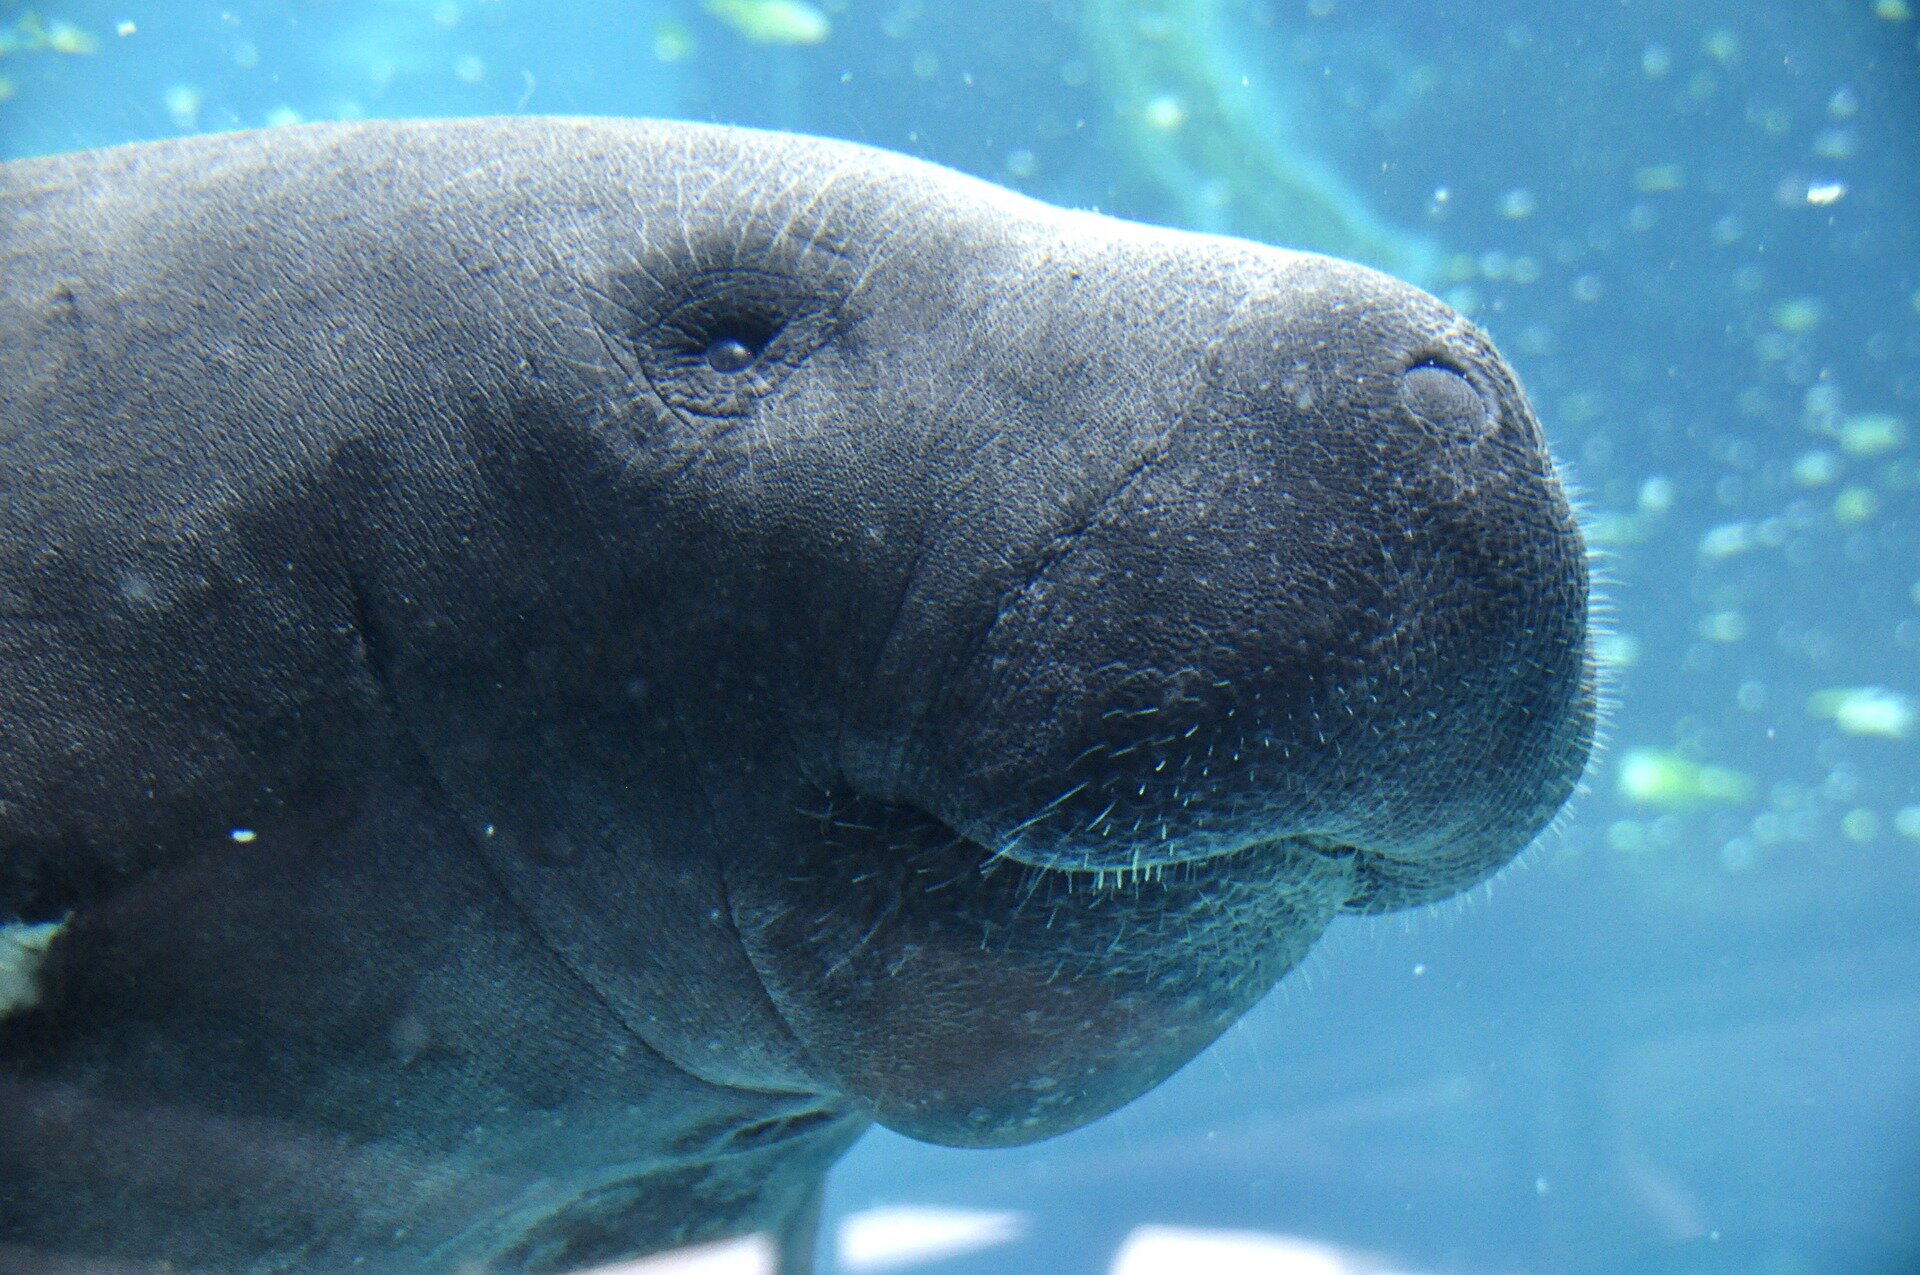 Lettuce, cabbage for manatees? Feds, conservationists consider feeding sea cows after 1,000 deaths